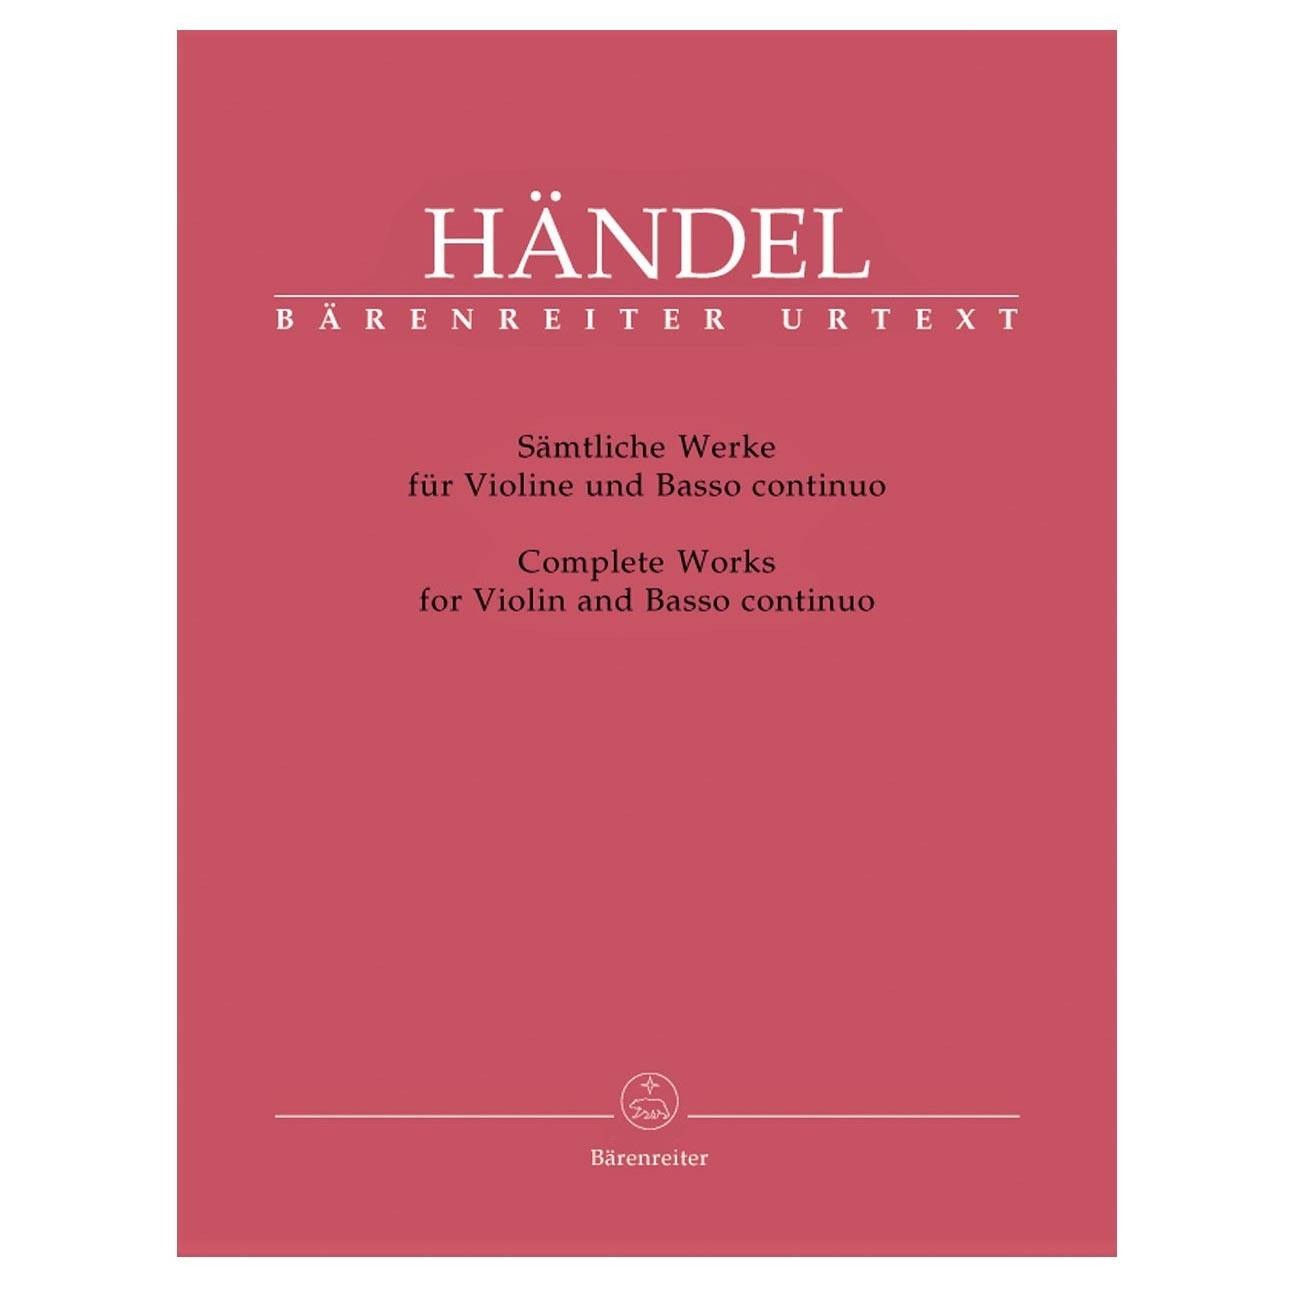 Handel - Complete Works for Violin & Basso Continuo